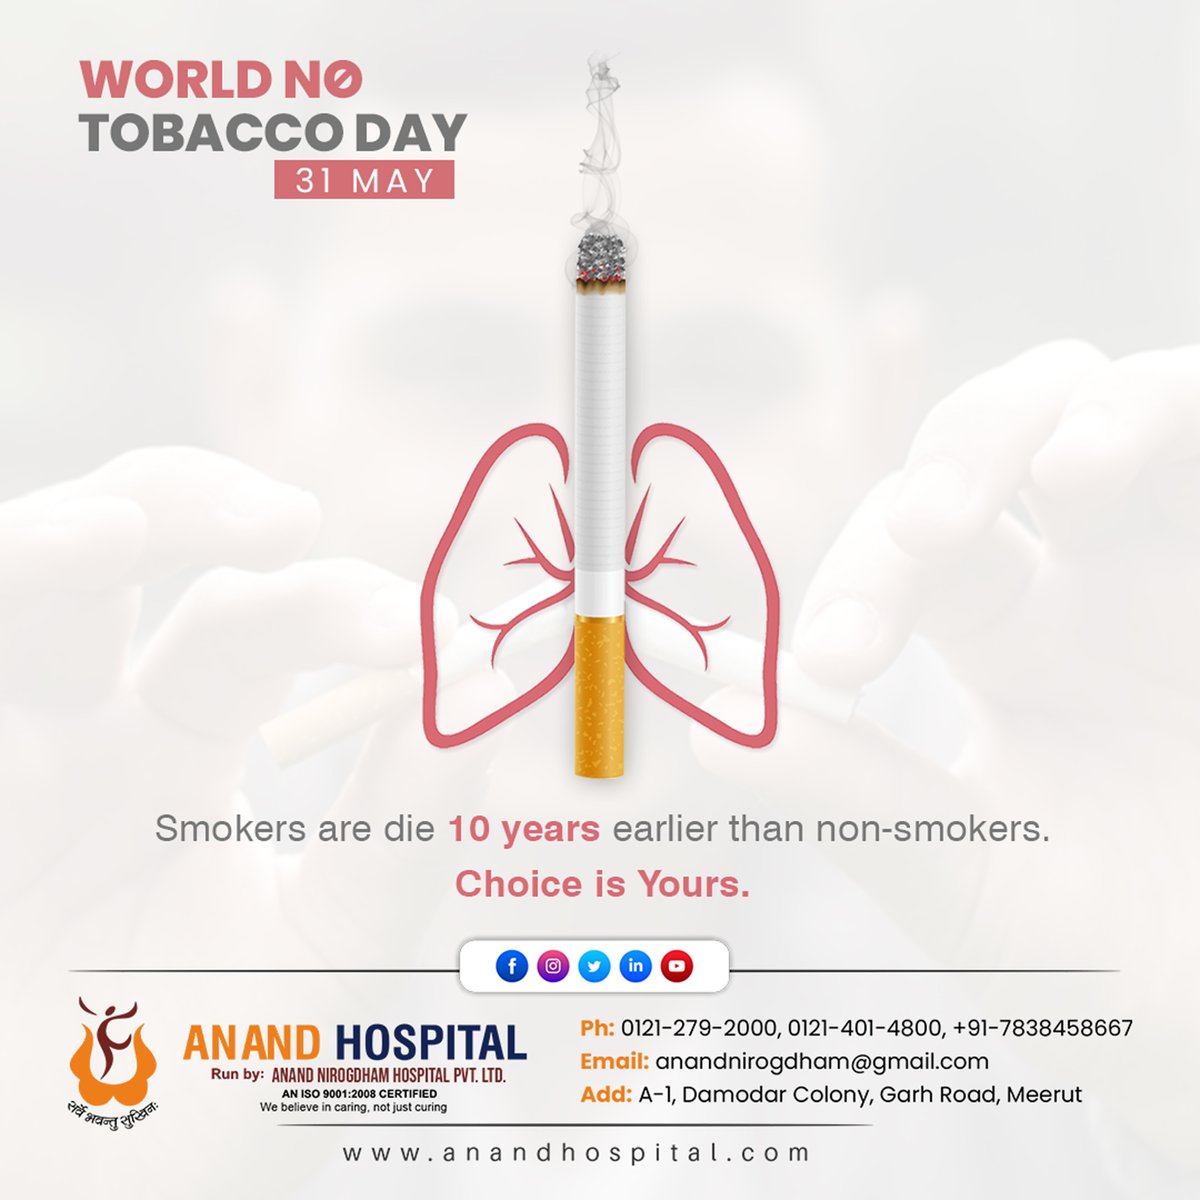 Let's take a pledge to quit tobacco before it takes our lives away.❌🚭

Happy World No Tobacco Day!
.
.
#Anandhospital #tobacco #tobaccofree #notobacco #worldnotobaccoday #nosmoking #quitsmoking #stopsmoking #worldnotabaccoday2022 #meerut